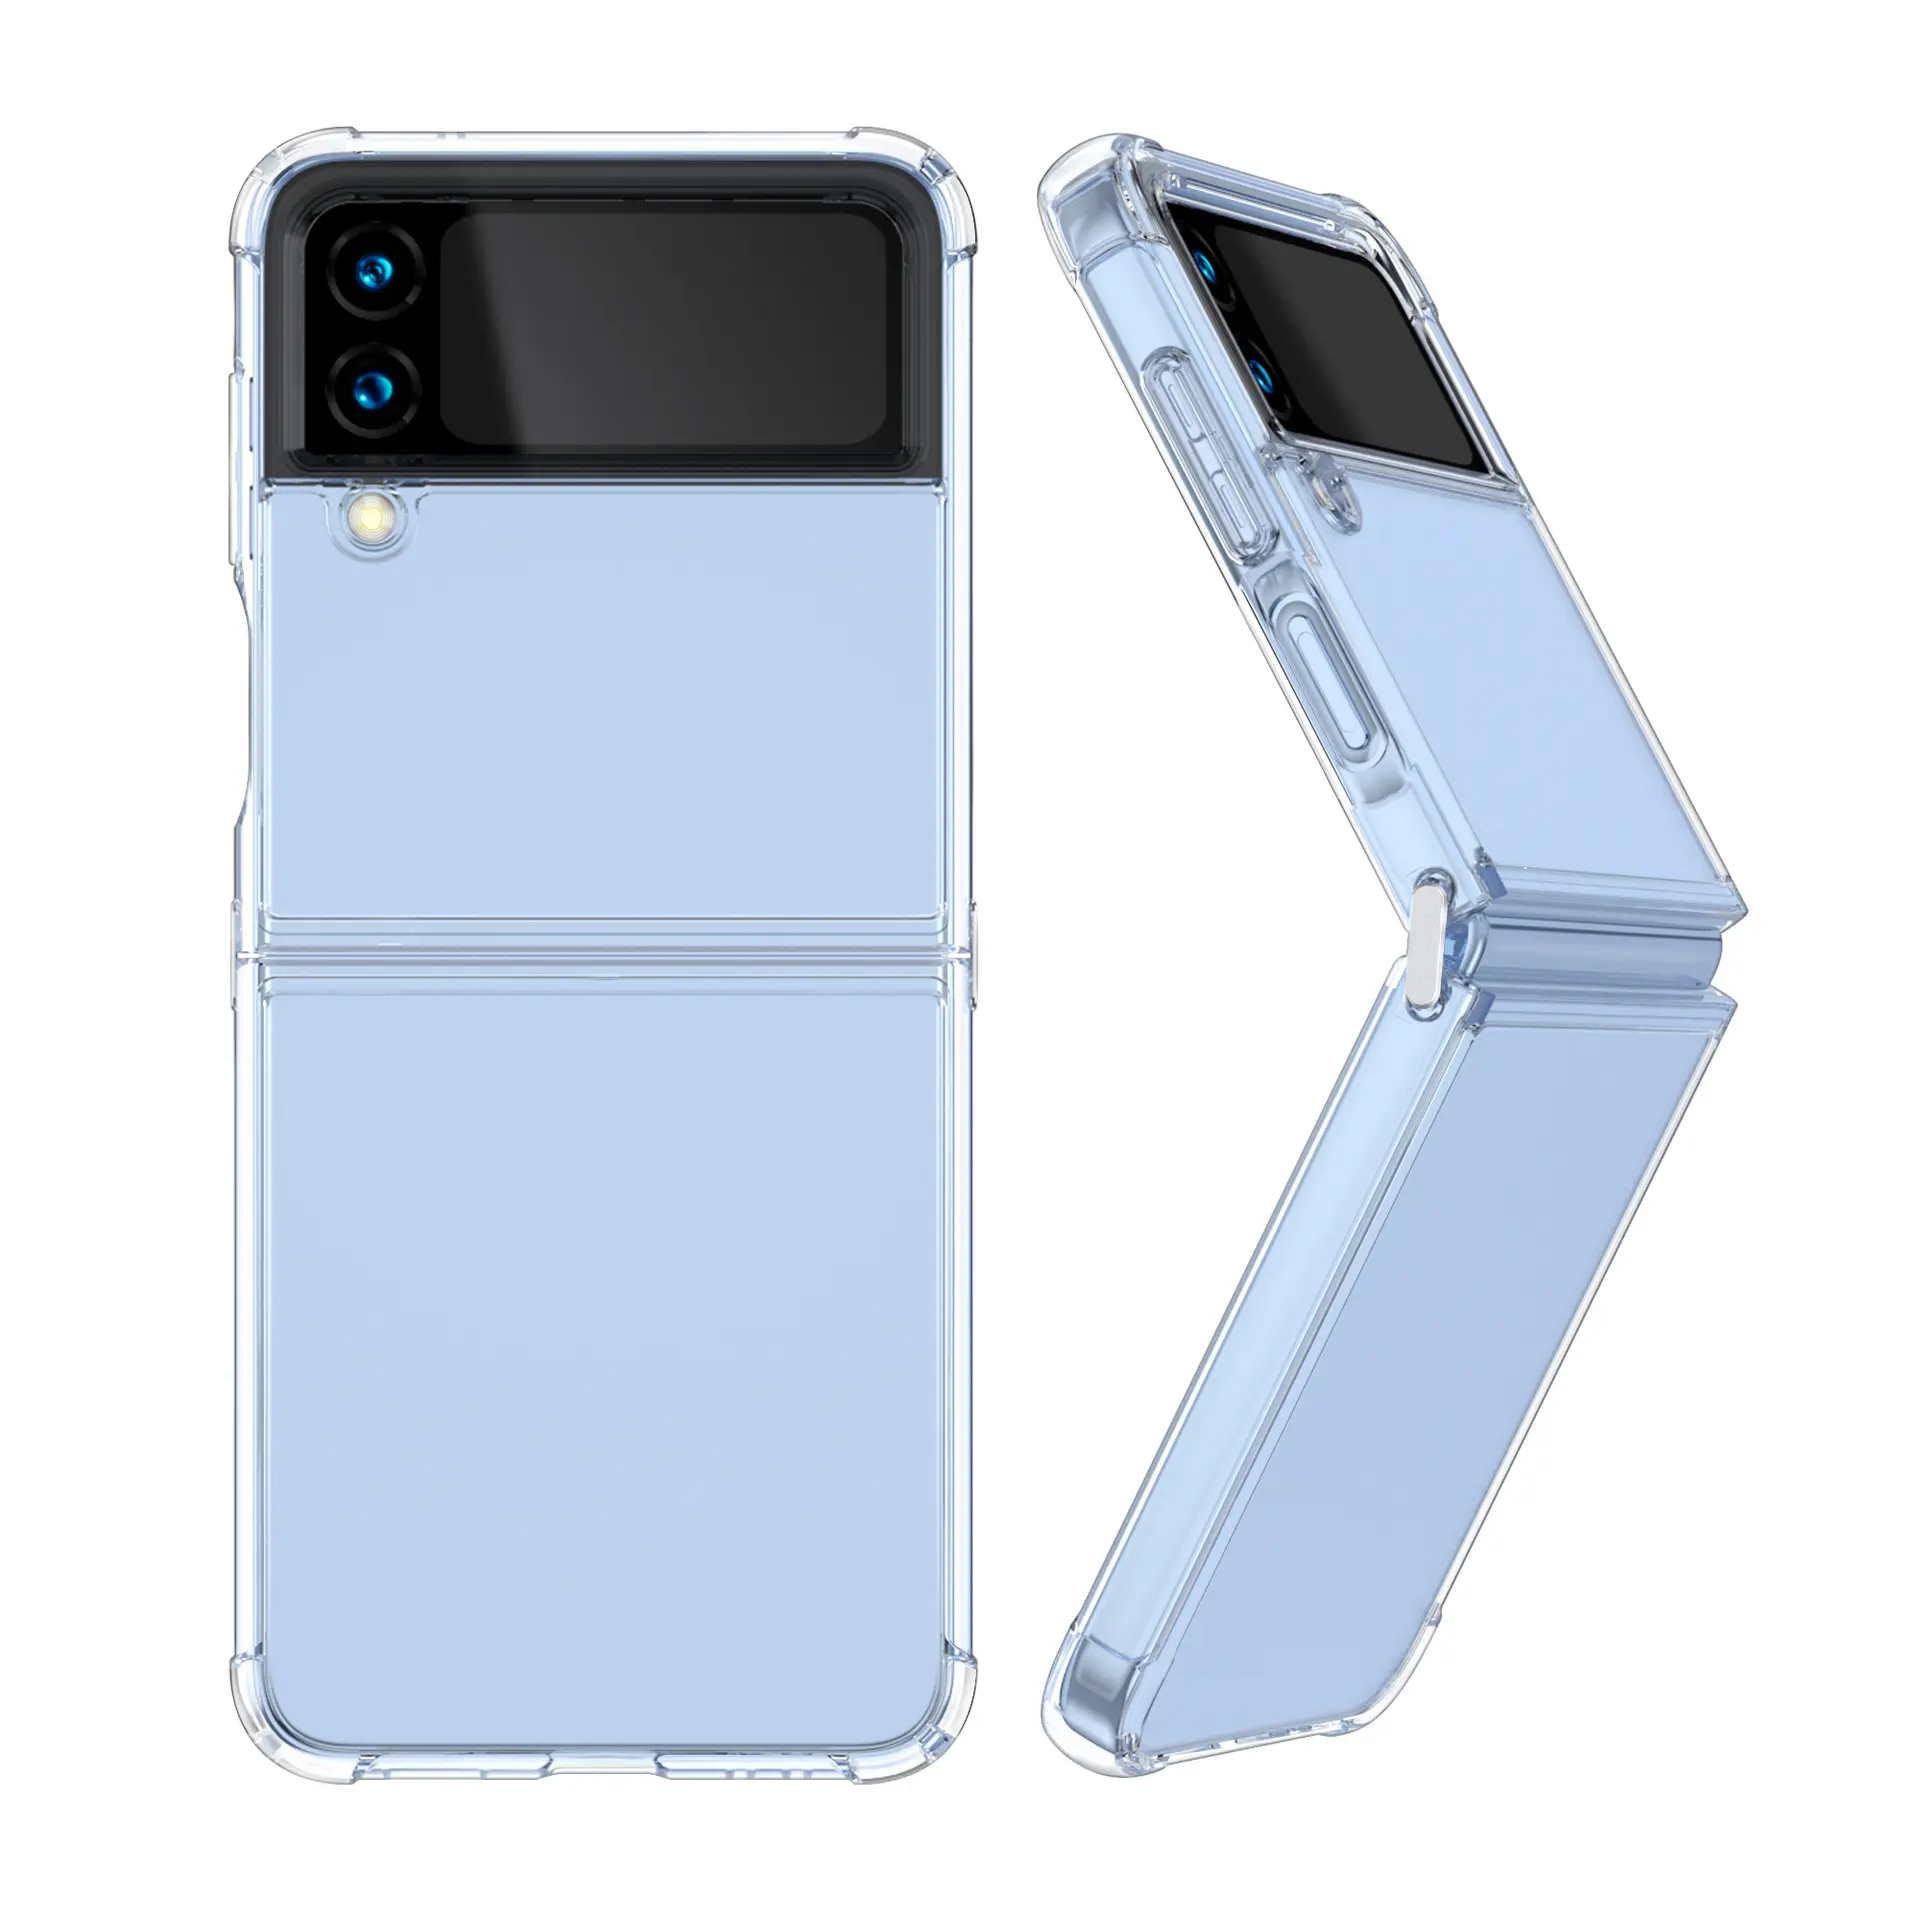 Zflip4 phone case is suitable for Samsung folding zflip4 transparent anti-fall acrylic hard shell two-in-one protective case